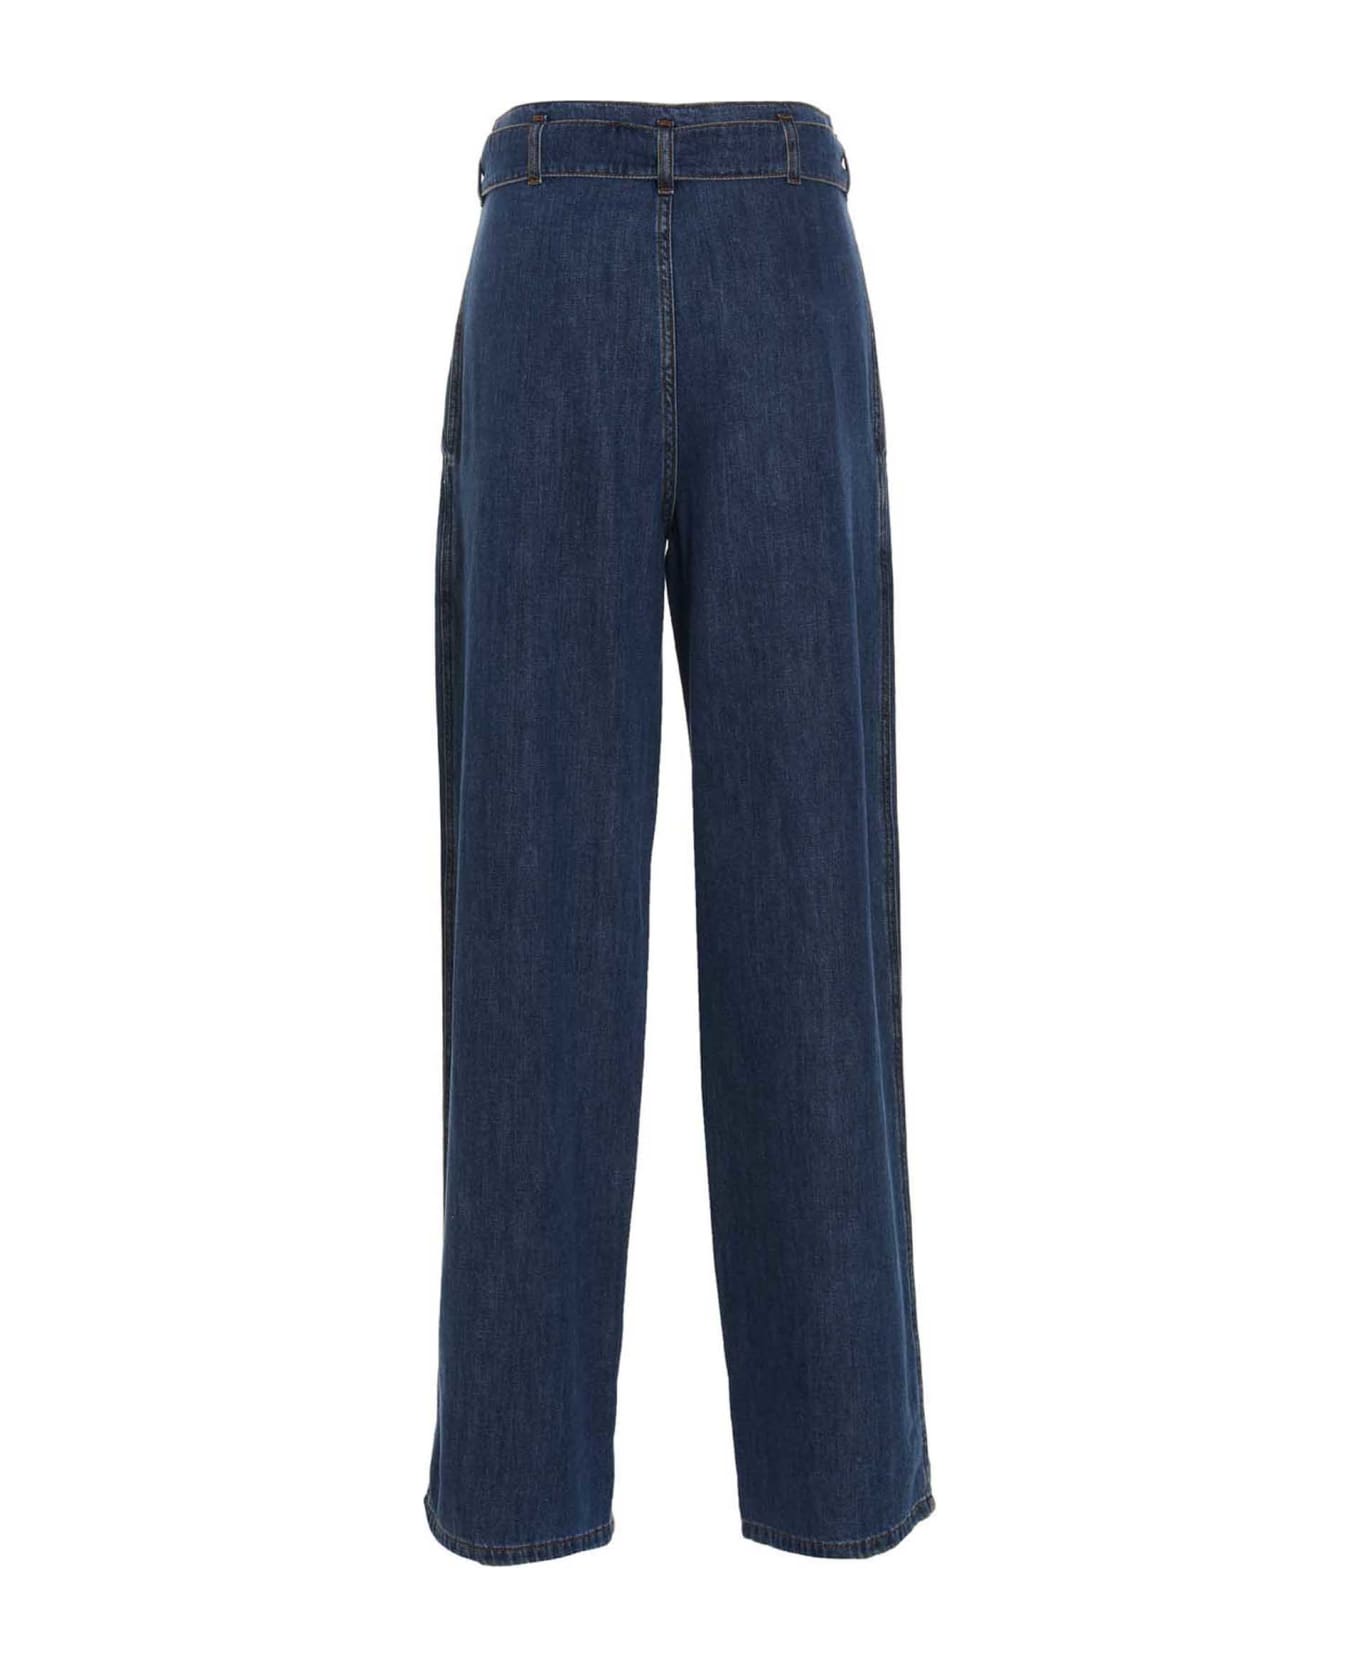 Philosophy di Lorenzo Serafini Jeans With Front Pleats - Blue